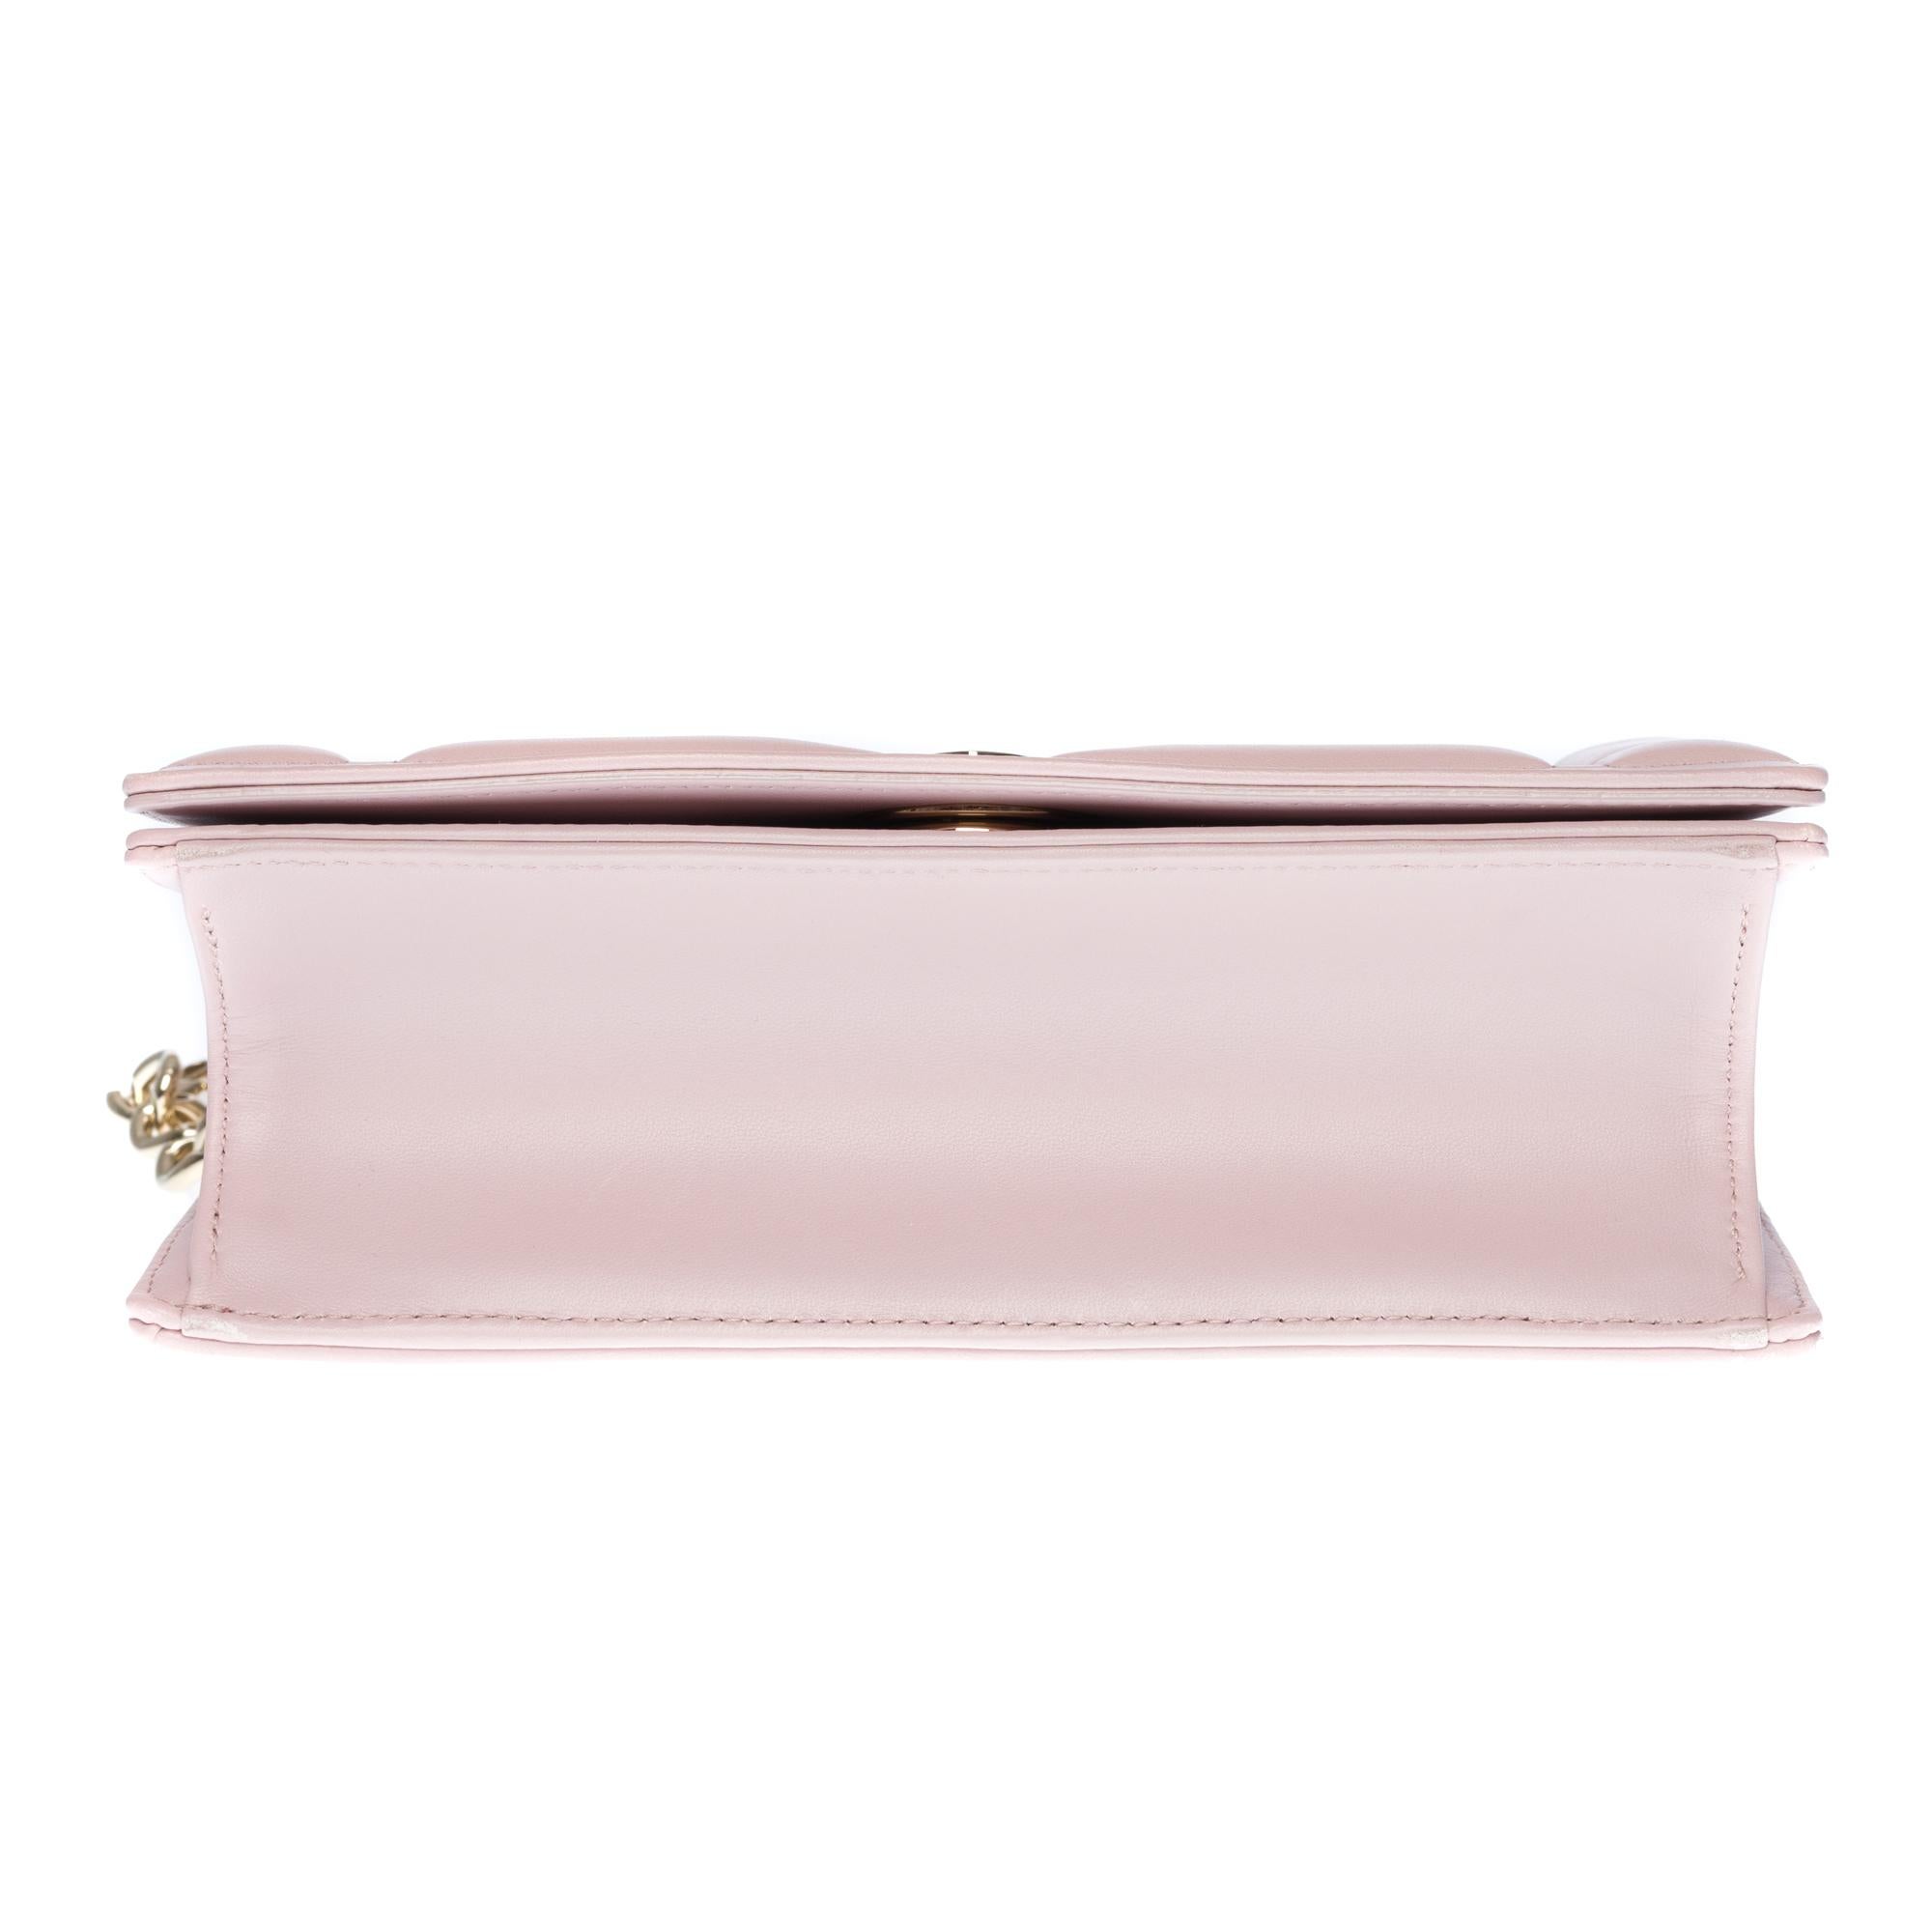 Women's Brand New /Christian Dior Diorama Shoulder bag in Pink cannage leather, SHW